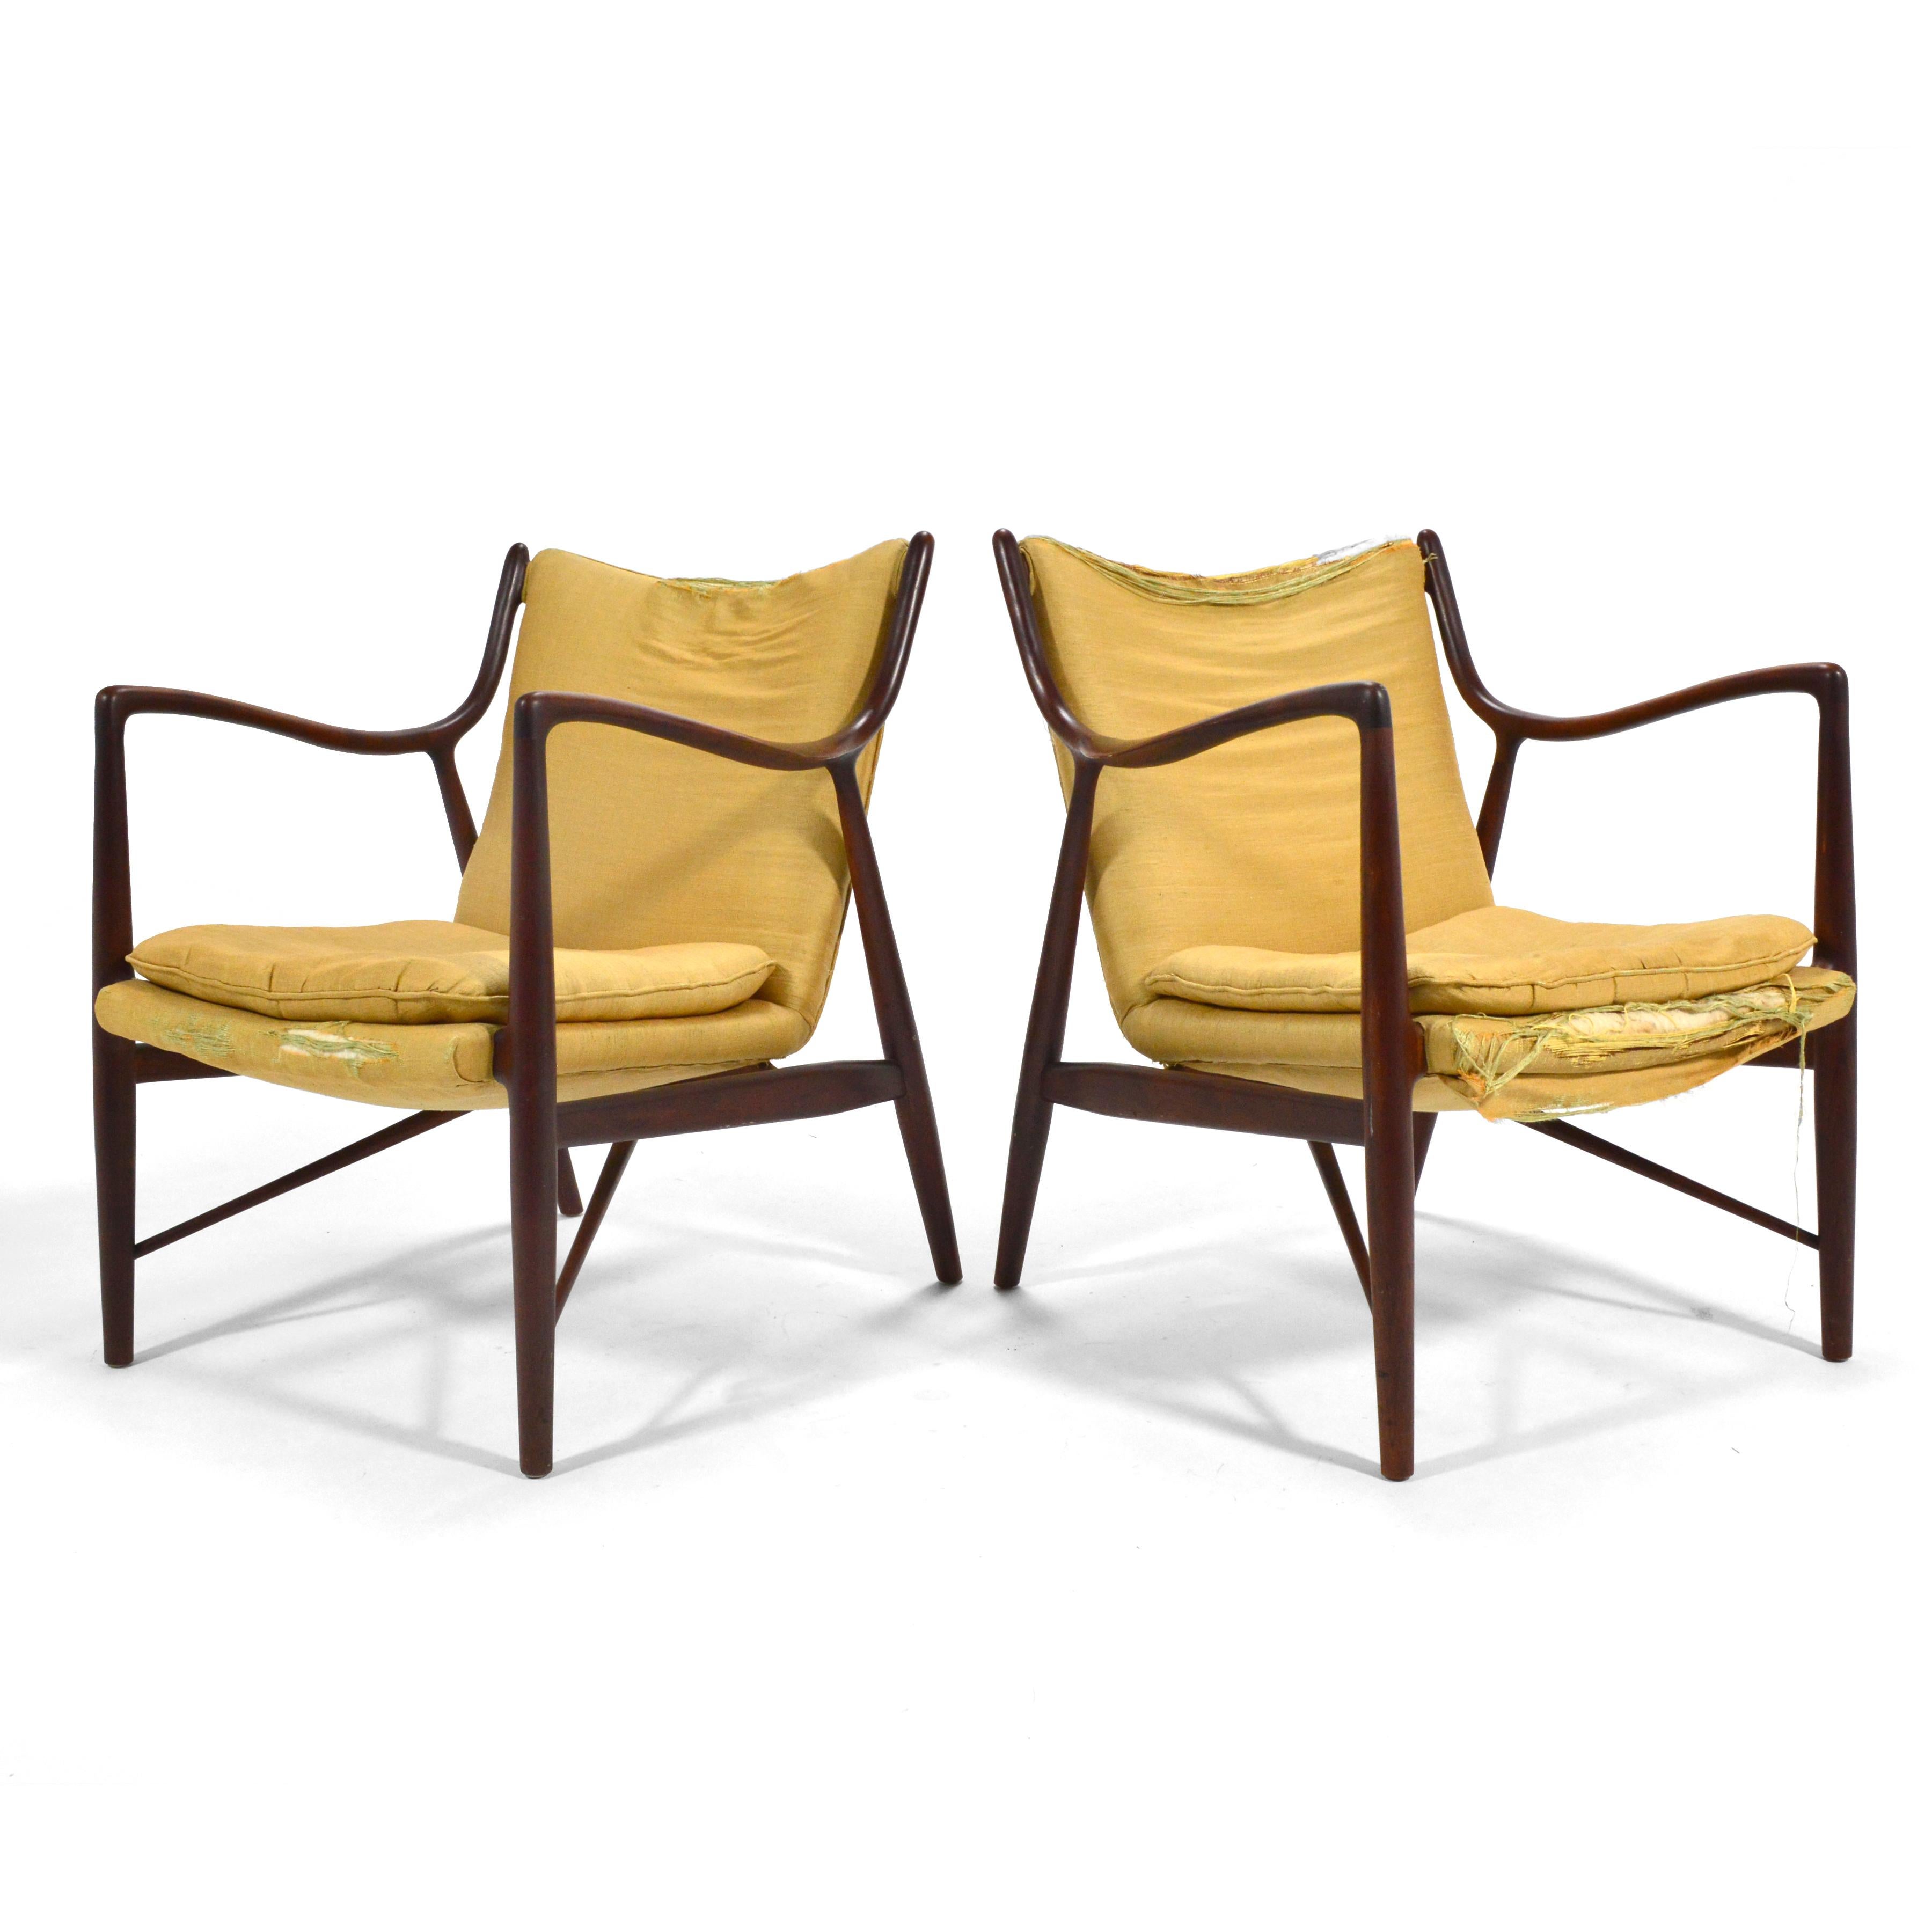 Pair of Finn Juhl #45 Chairs by Baker For Sale 2